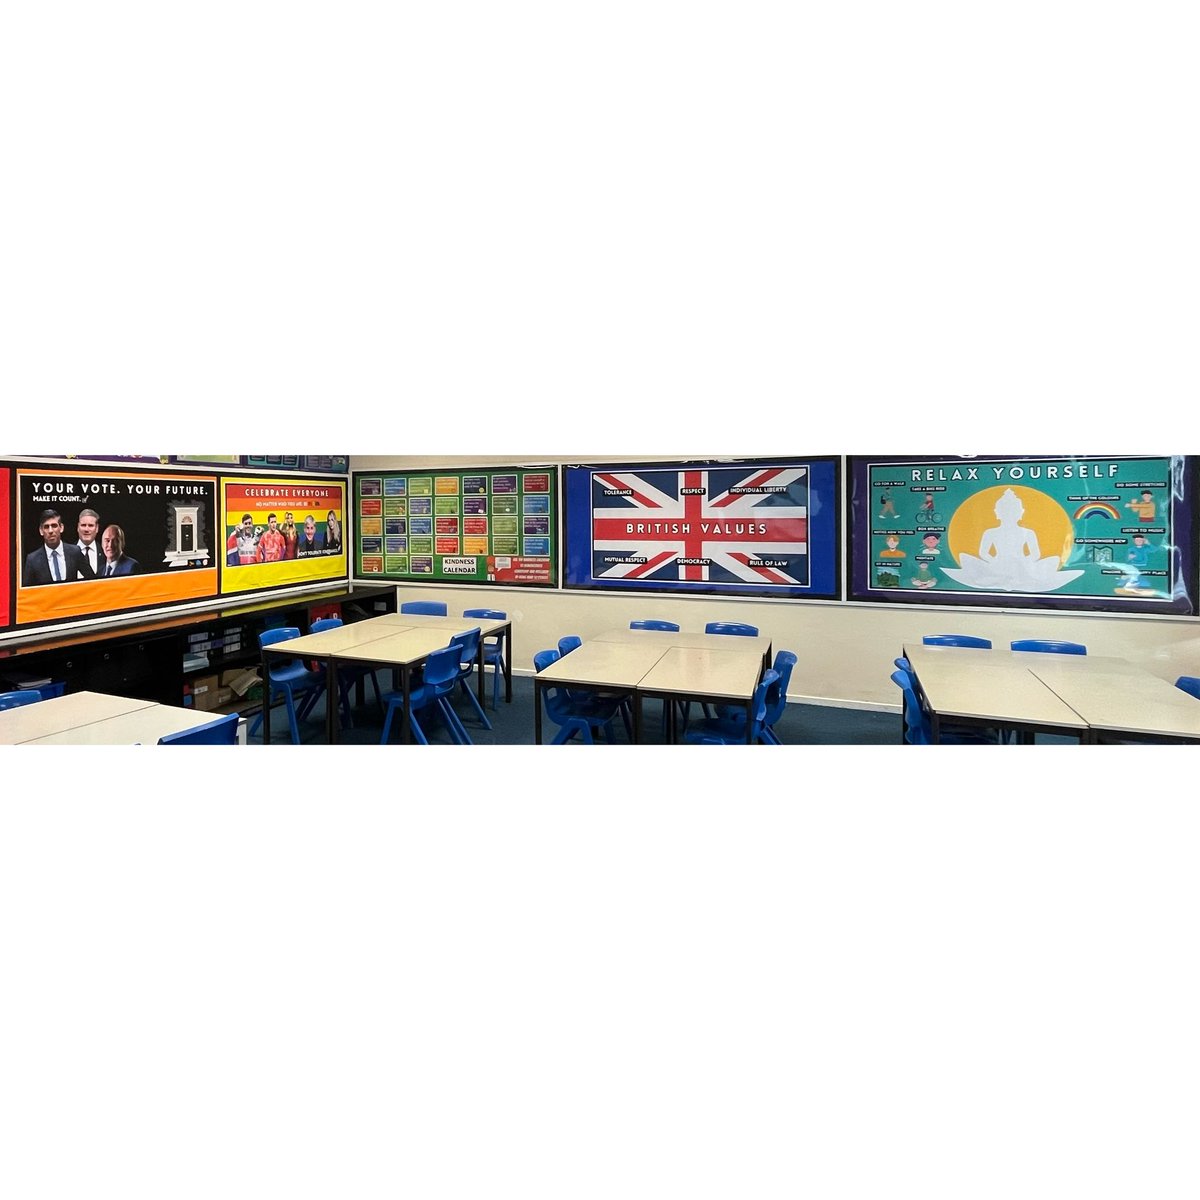 7 years into teaching and I’ve never been happy with my displays. I think I’ve actually managed to do it this year 👌🏻 I actually love my classroom and their learning space! #PSHE #ClassroomDesign #Edutwitter #Teachers #Teaching #TeachersofTwitter #TeacherChat